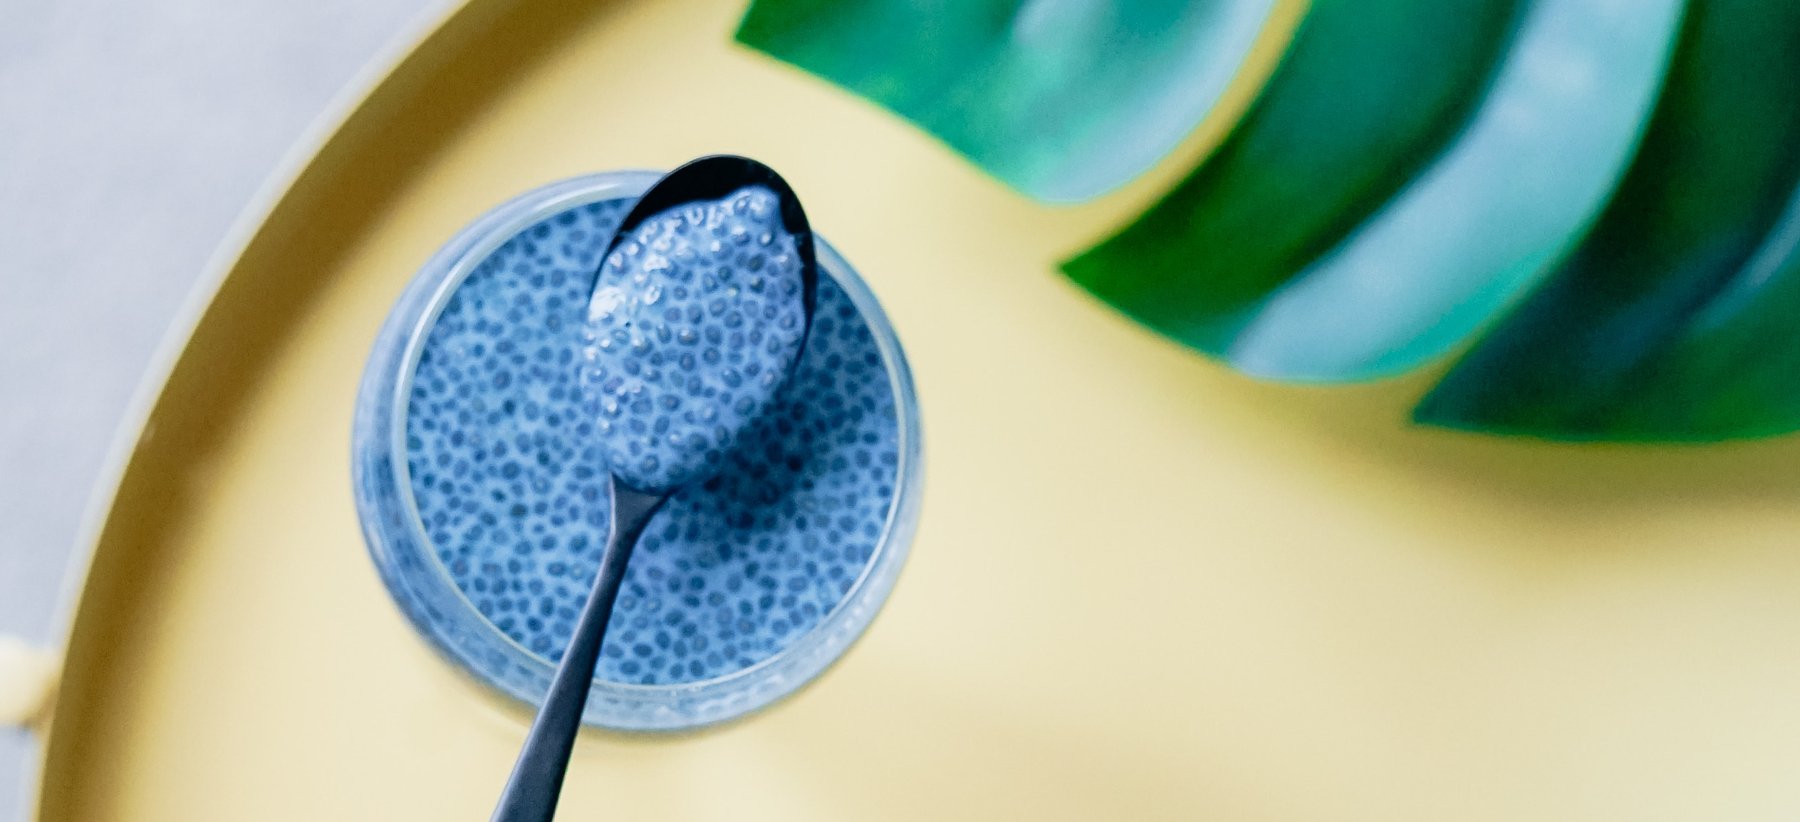 11 Health And Nutrition Benefits Of Chia Seeds